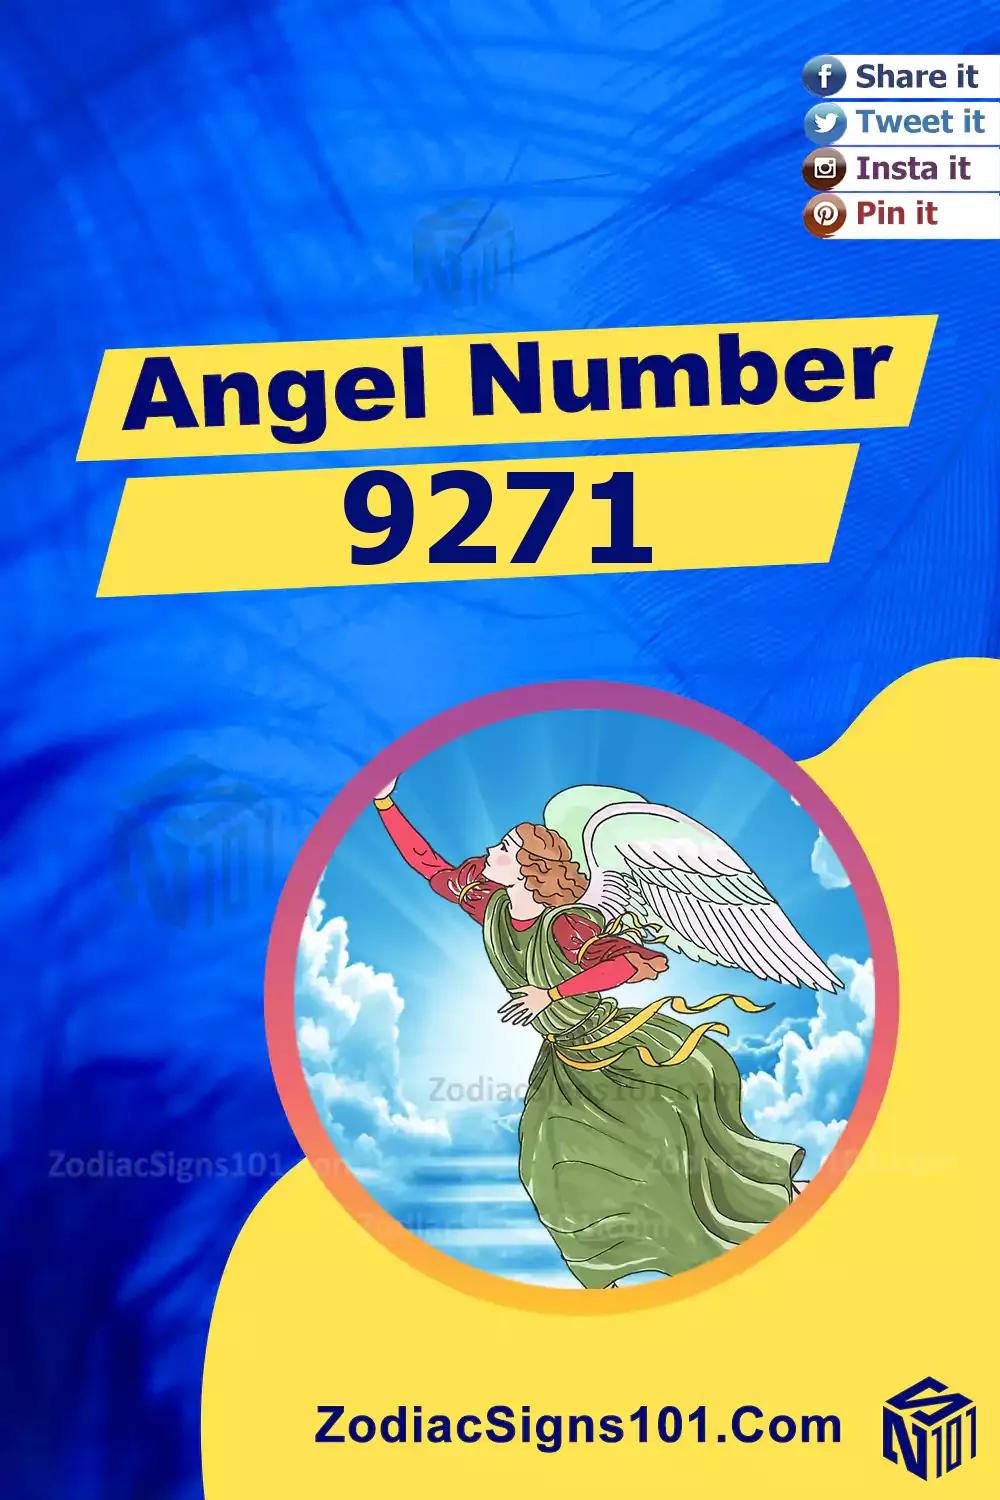 9271 Angel Number Meaning